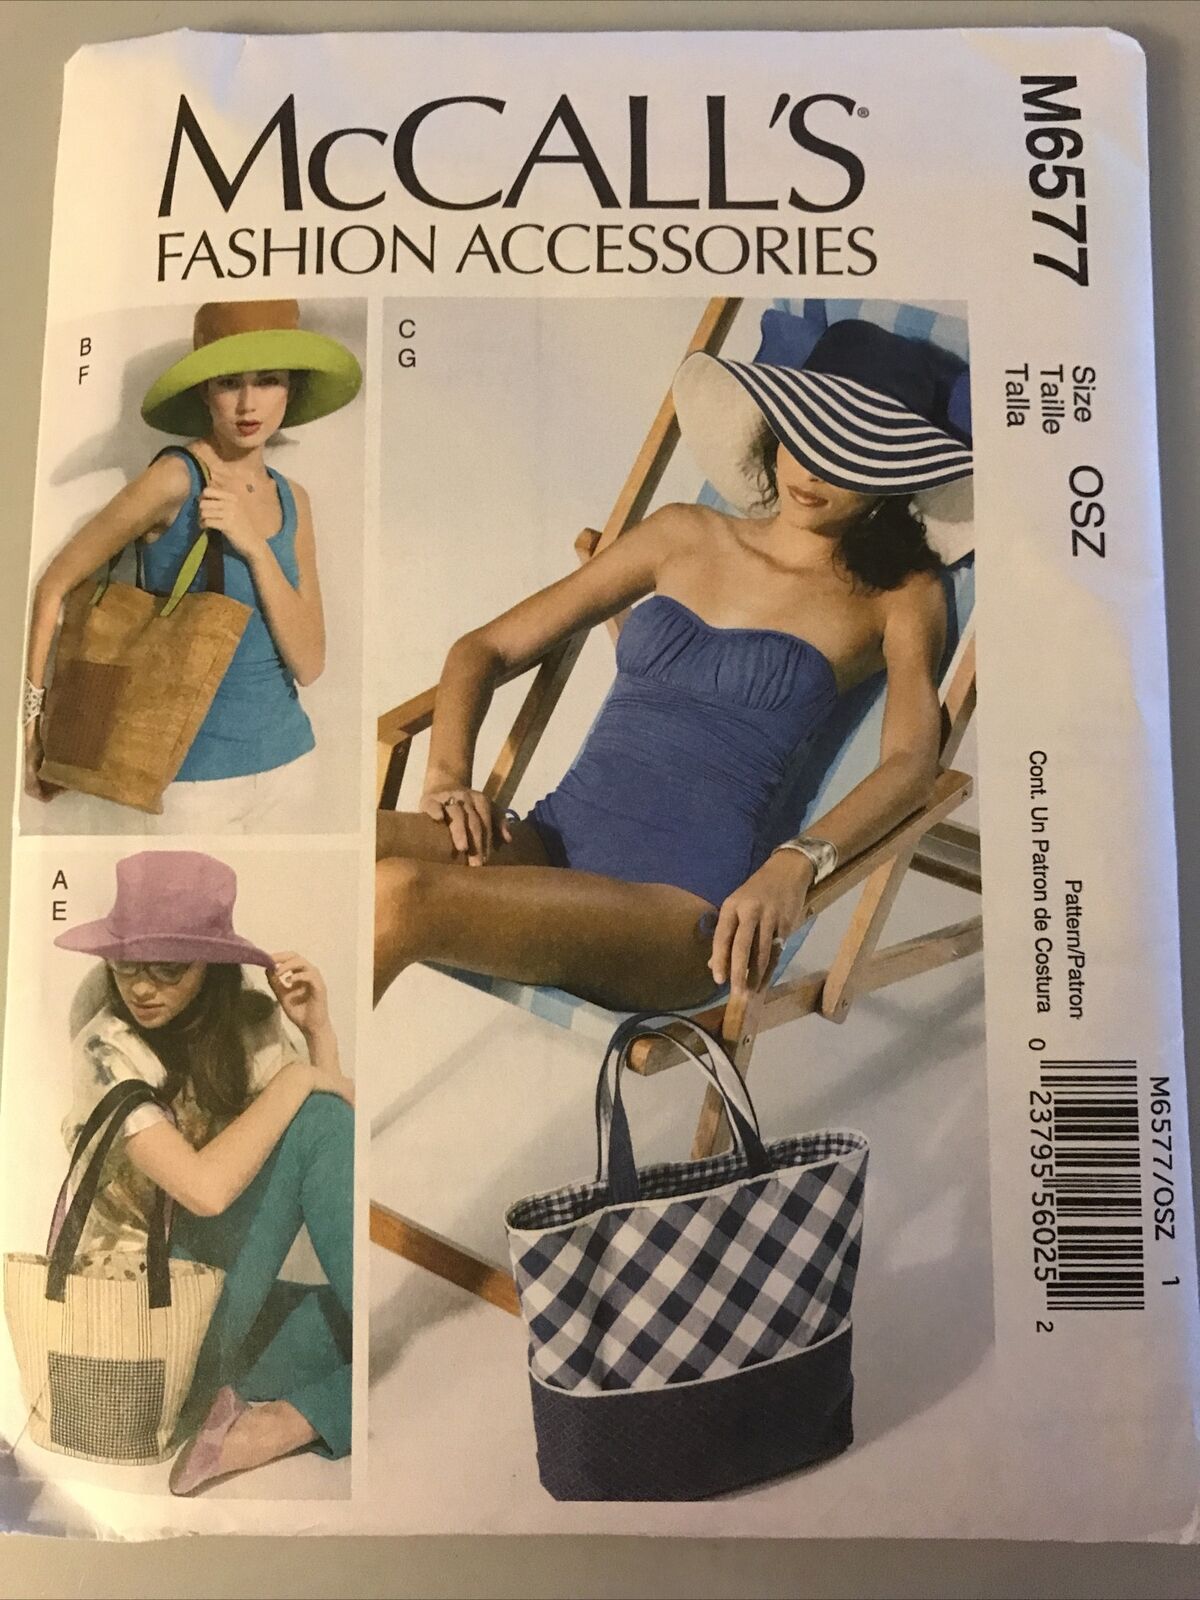 2012 McCalls Sewing Pattern M6577 Womens Hats & Totes 8 Styles Accessories 12612